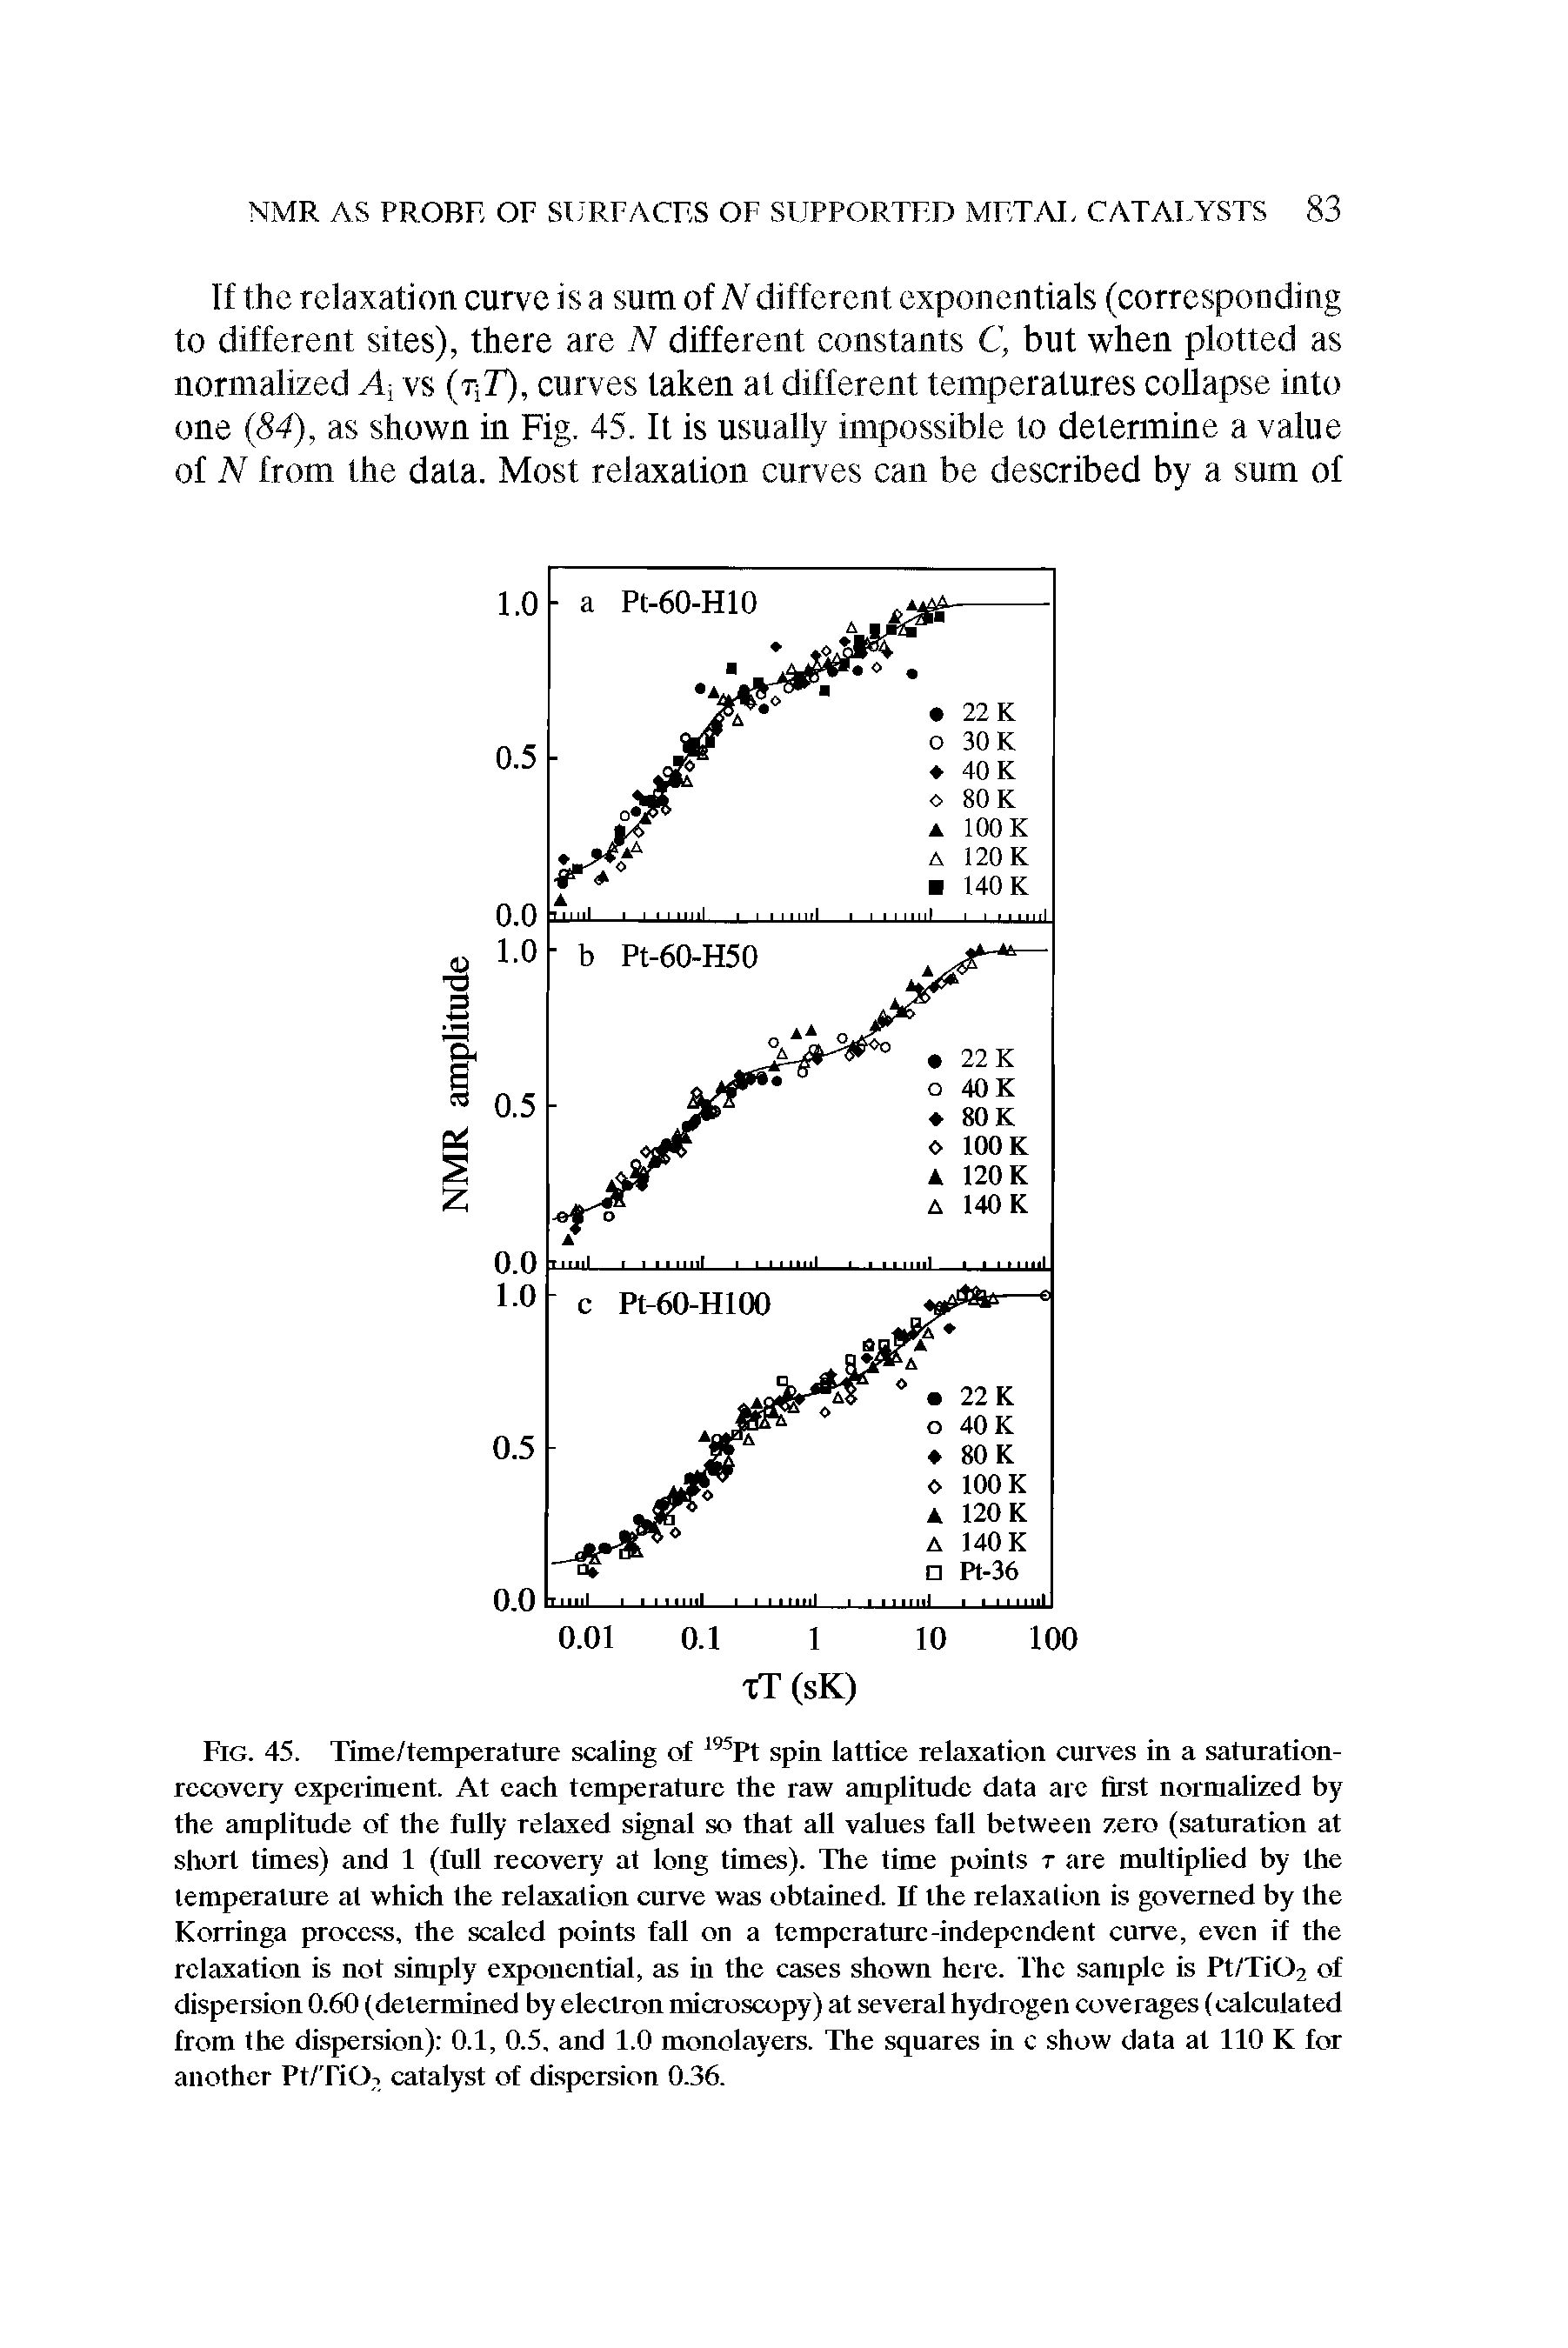 Fig. 45. Time/temperature scaling of spin lattice relaxation curves in a saturation-recovery experiment. At each temperature the raw amplitude data arc first normalized by the amplitude of the fully relaxed signal so that all values fall between zero (saturation at short times) and 1 (lull recovery at long times). The time points t are multiplied by the temperature at which the relaxation curve was obtained. If the relaxation is governed by the Korringa process, the scaled points fall on a temperature-independent curve, even if the relaxation is not simply exponential, as in the cases shown here. The sample is Pt/Ti02 of dispersion 0.60 (determined by electron microscopy) at several hydrogen coverages (calculated from the dispersion) 0.1, 0.5, and 1.0 monolayers. The squares in c show data at 110 K for another Pt/TiOi catalyst of dispersion 0.36.